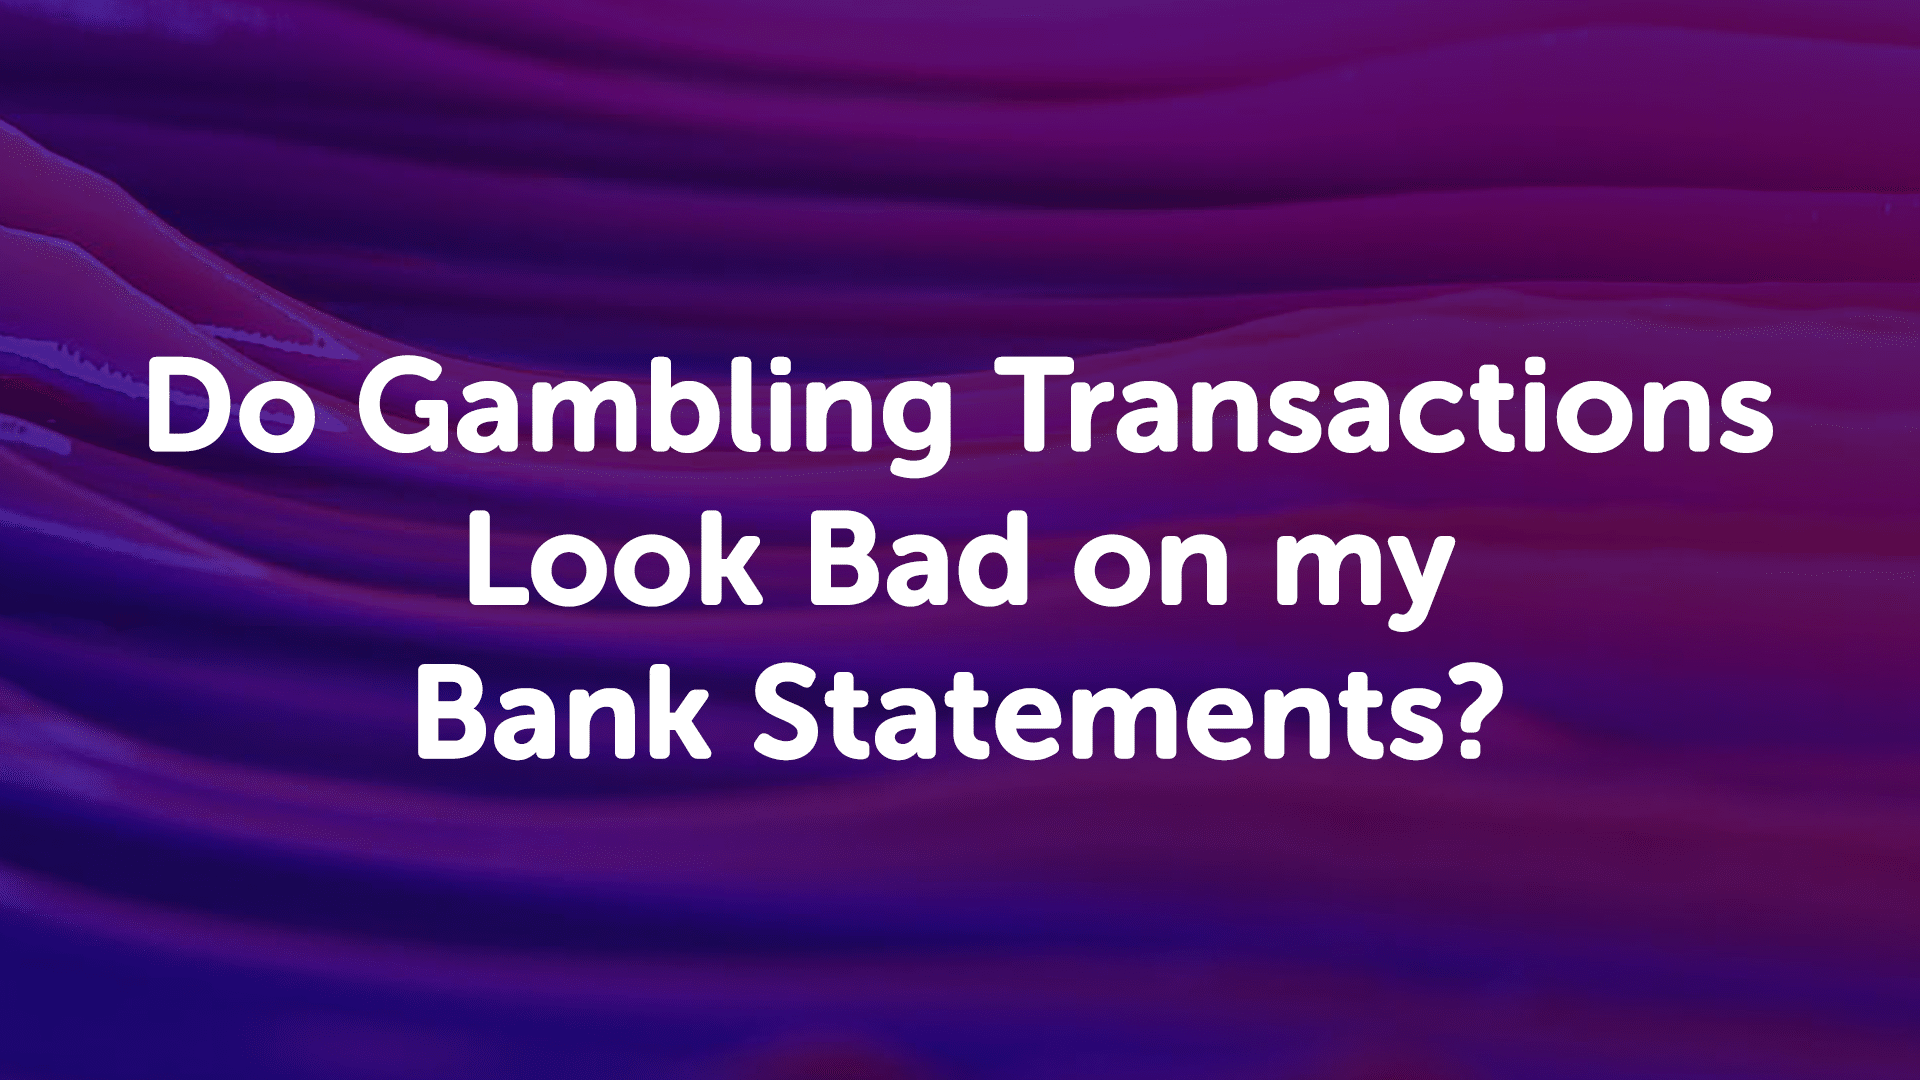 Do Gambling Transactions Look Bad on My Bank Statements in Newcastle?